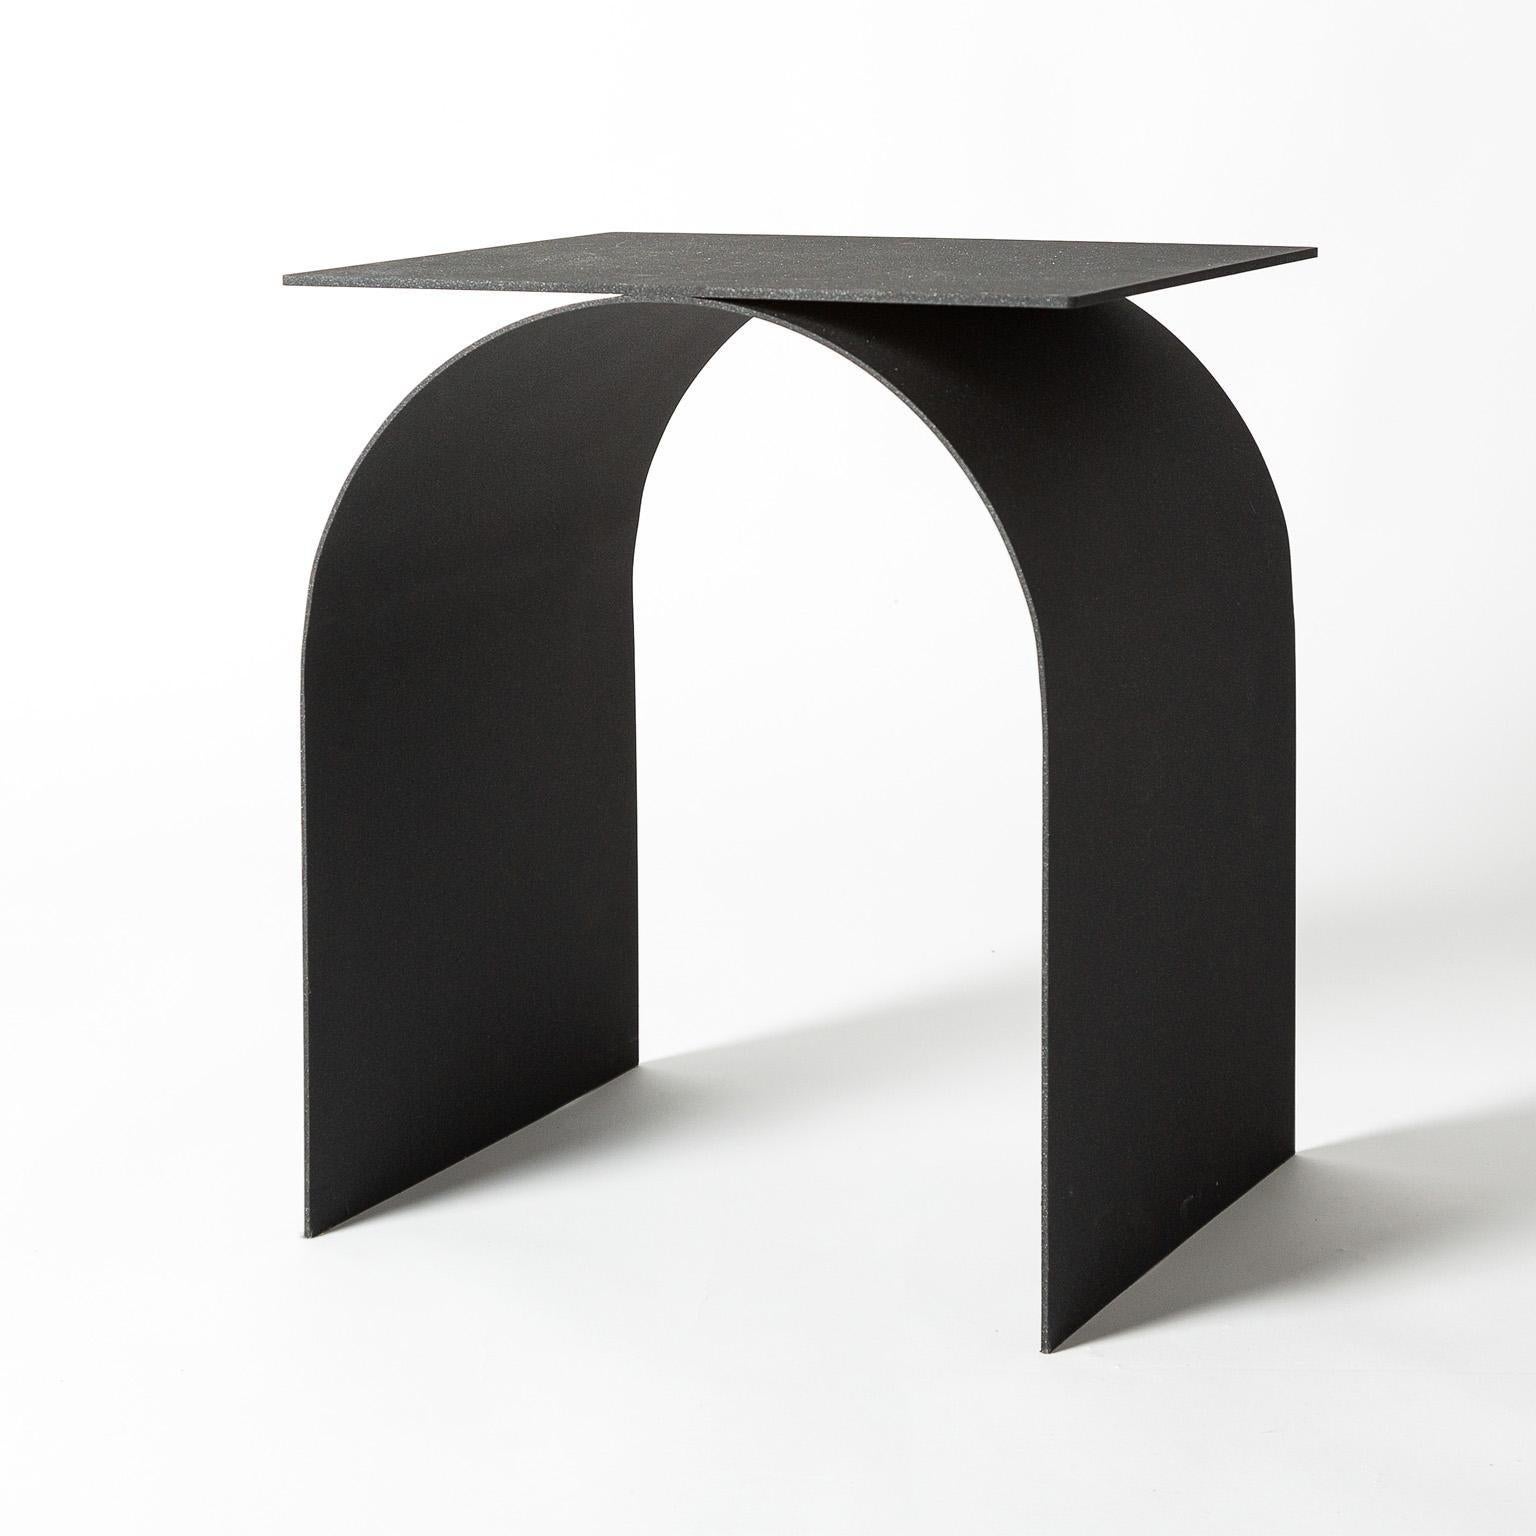 The architectural essence of the stools derives from the neoclassic style of Palladio.
A sheet of thin metal as air draws the shape of this timeless product. A square shape projecting shadows on an arch is the focus behind this timeless stool.